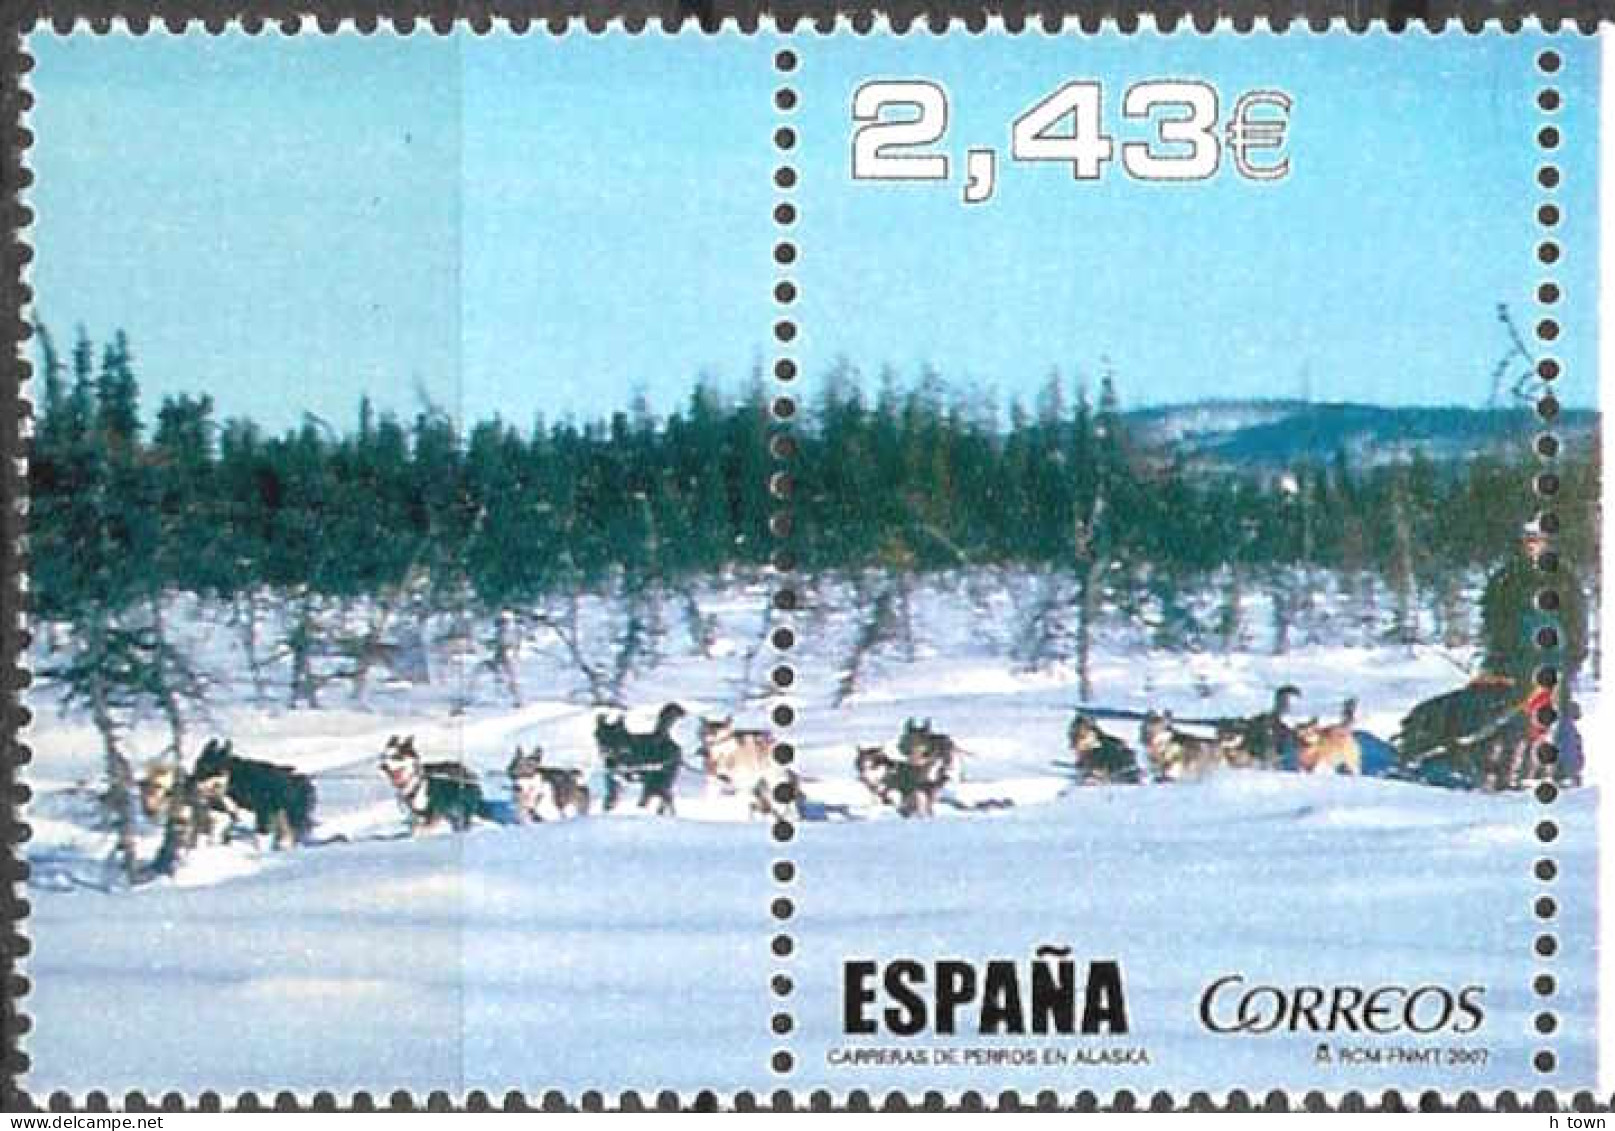 413  Chiens D'attelage: Timbre D'Espagne, 2007 - Sled Dogs In Alaska: Stamp From Spain. Chien De Traîneau Sledge Dog - Dogs